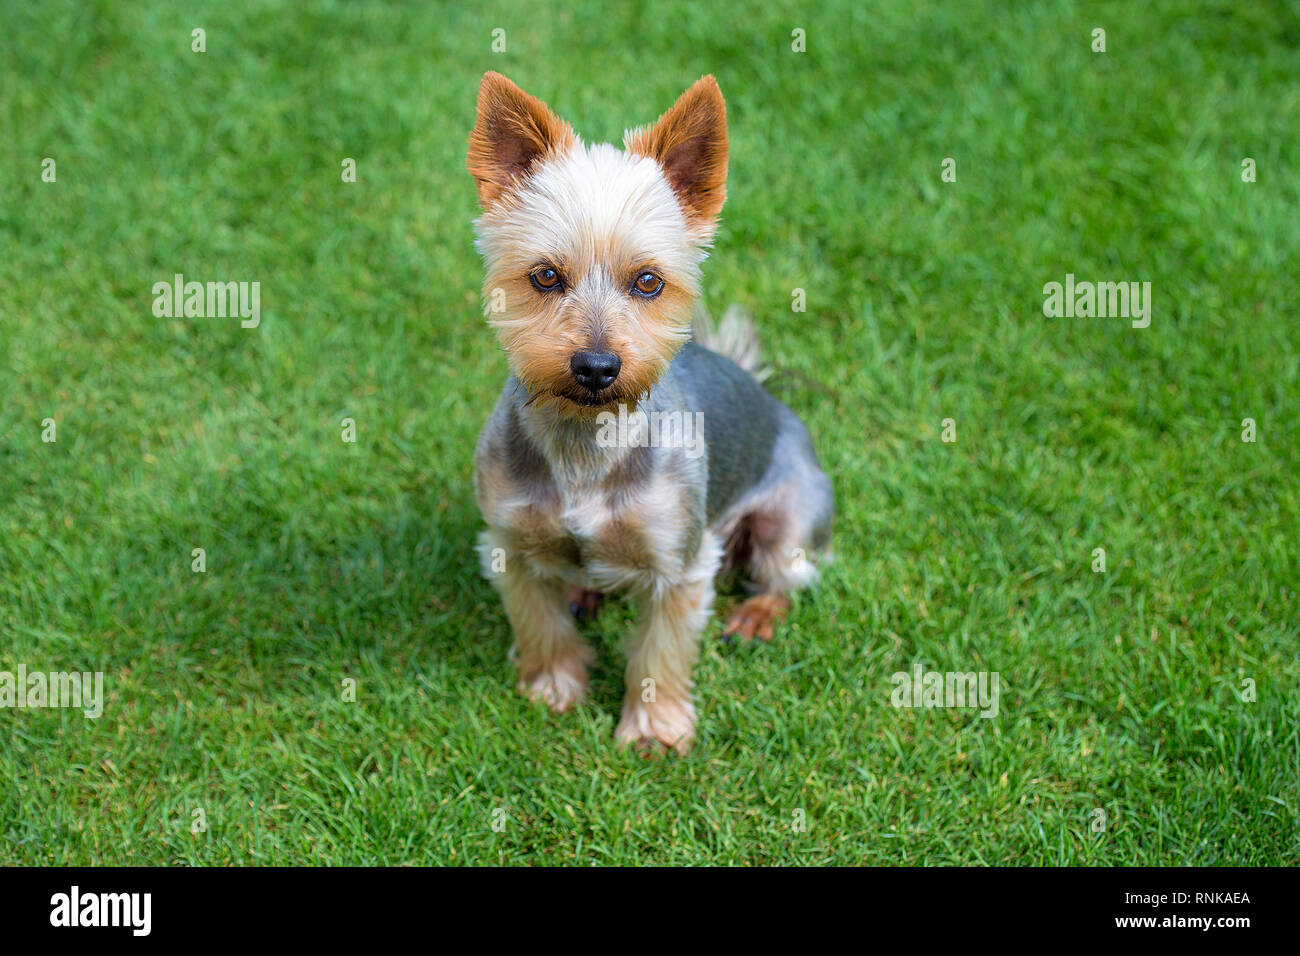 Adorable Australian Silky Terrier posing on fresh mowed lawn in summer day. Dog sitting on fresh cut grass waiting for the command. Stock Photo